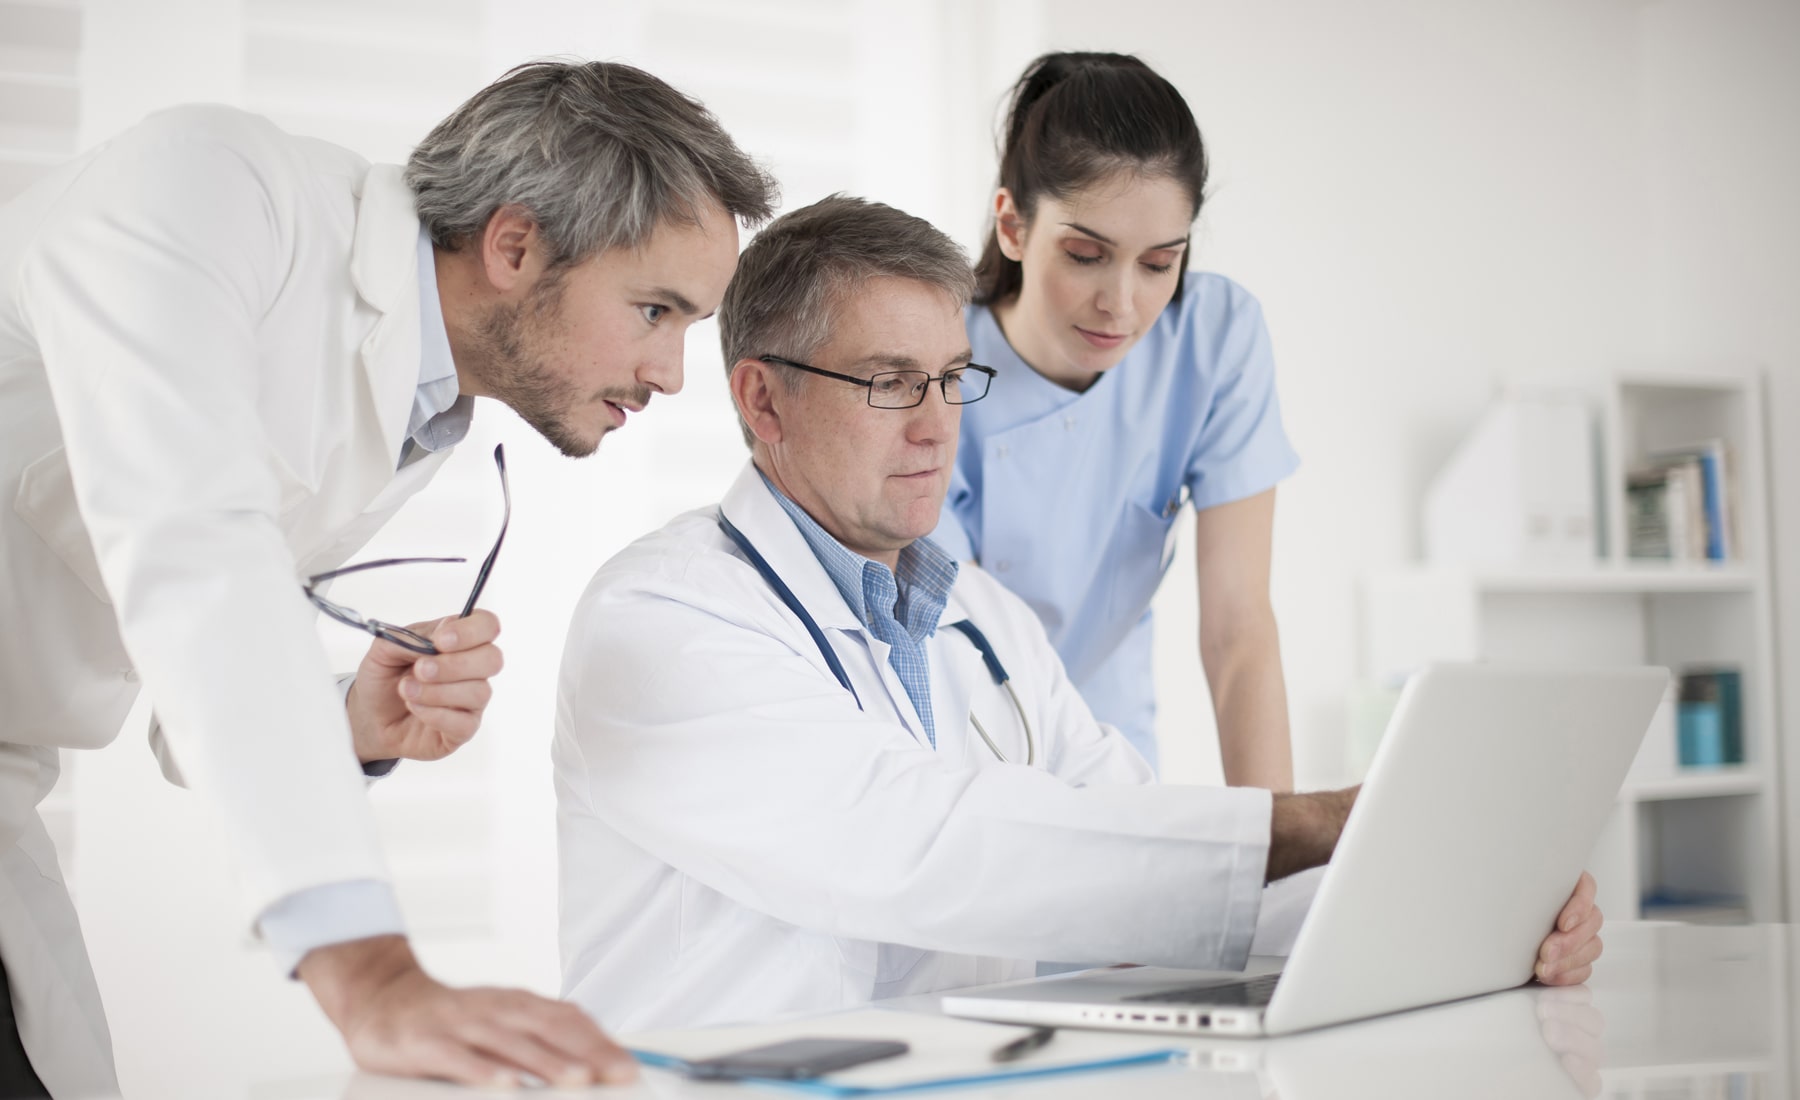 Physician can record the patient's symptoms, diagnose, and order treatment plans